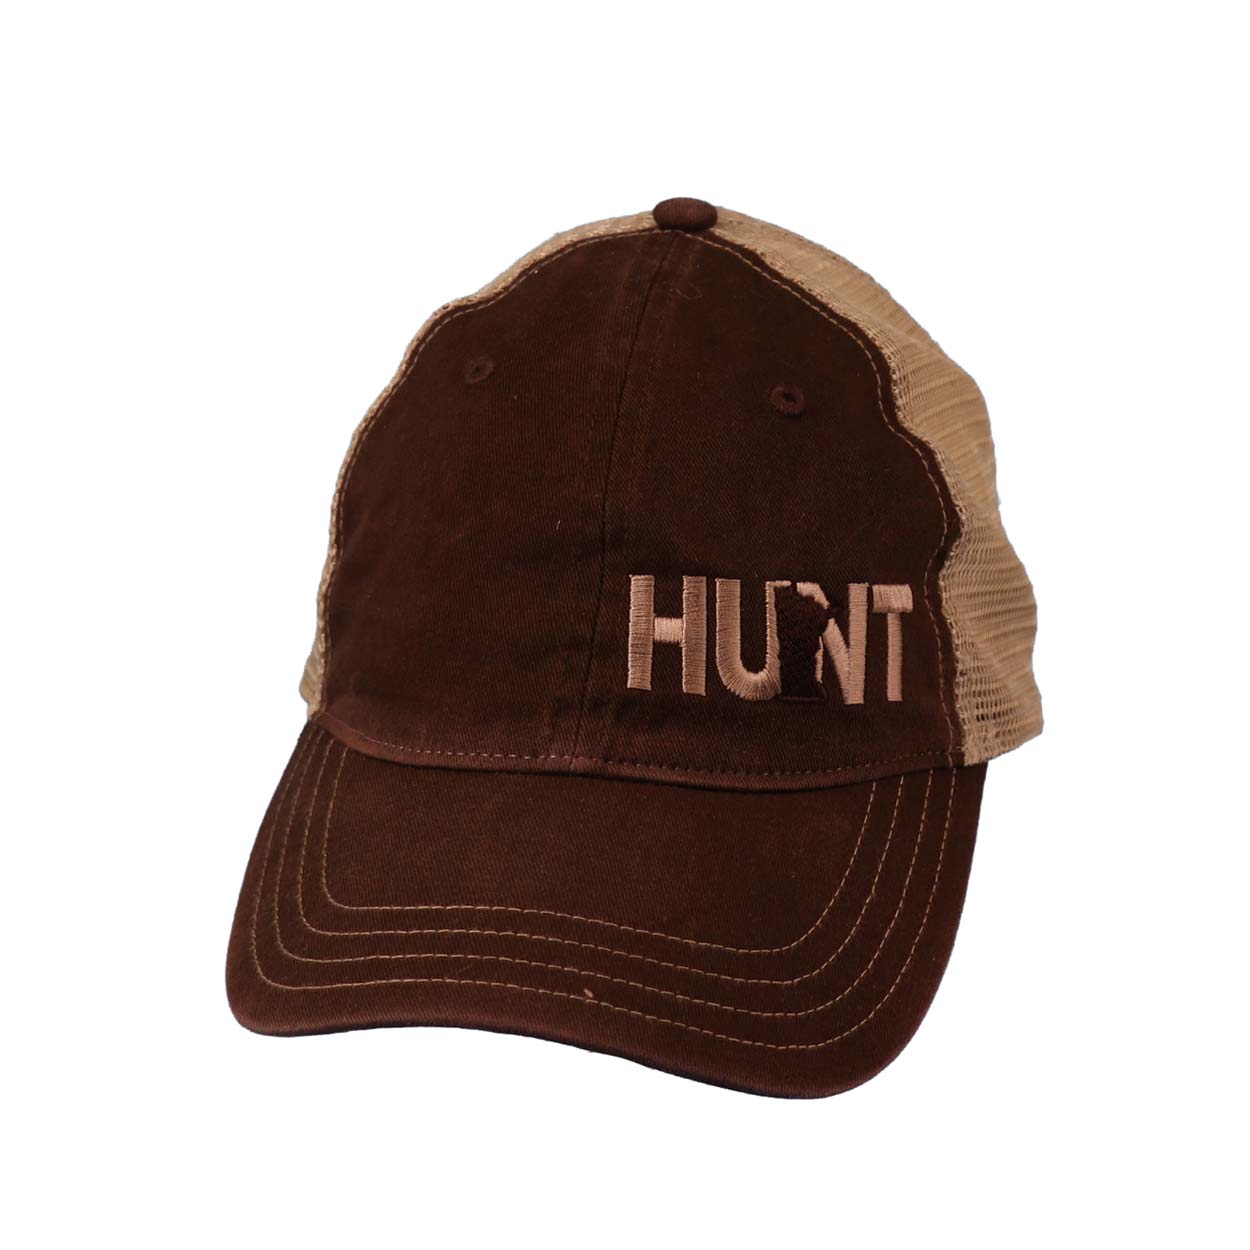 Hunt Minnesota Night Out Embroidered Unstructured Snapback Dad Hat Brown/Khaki